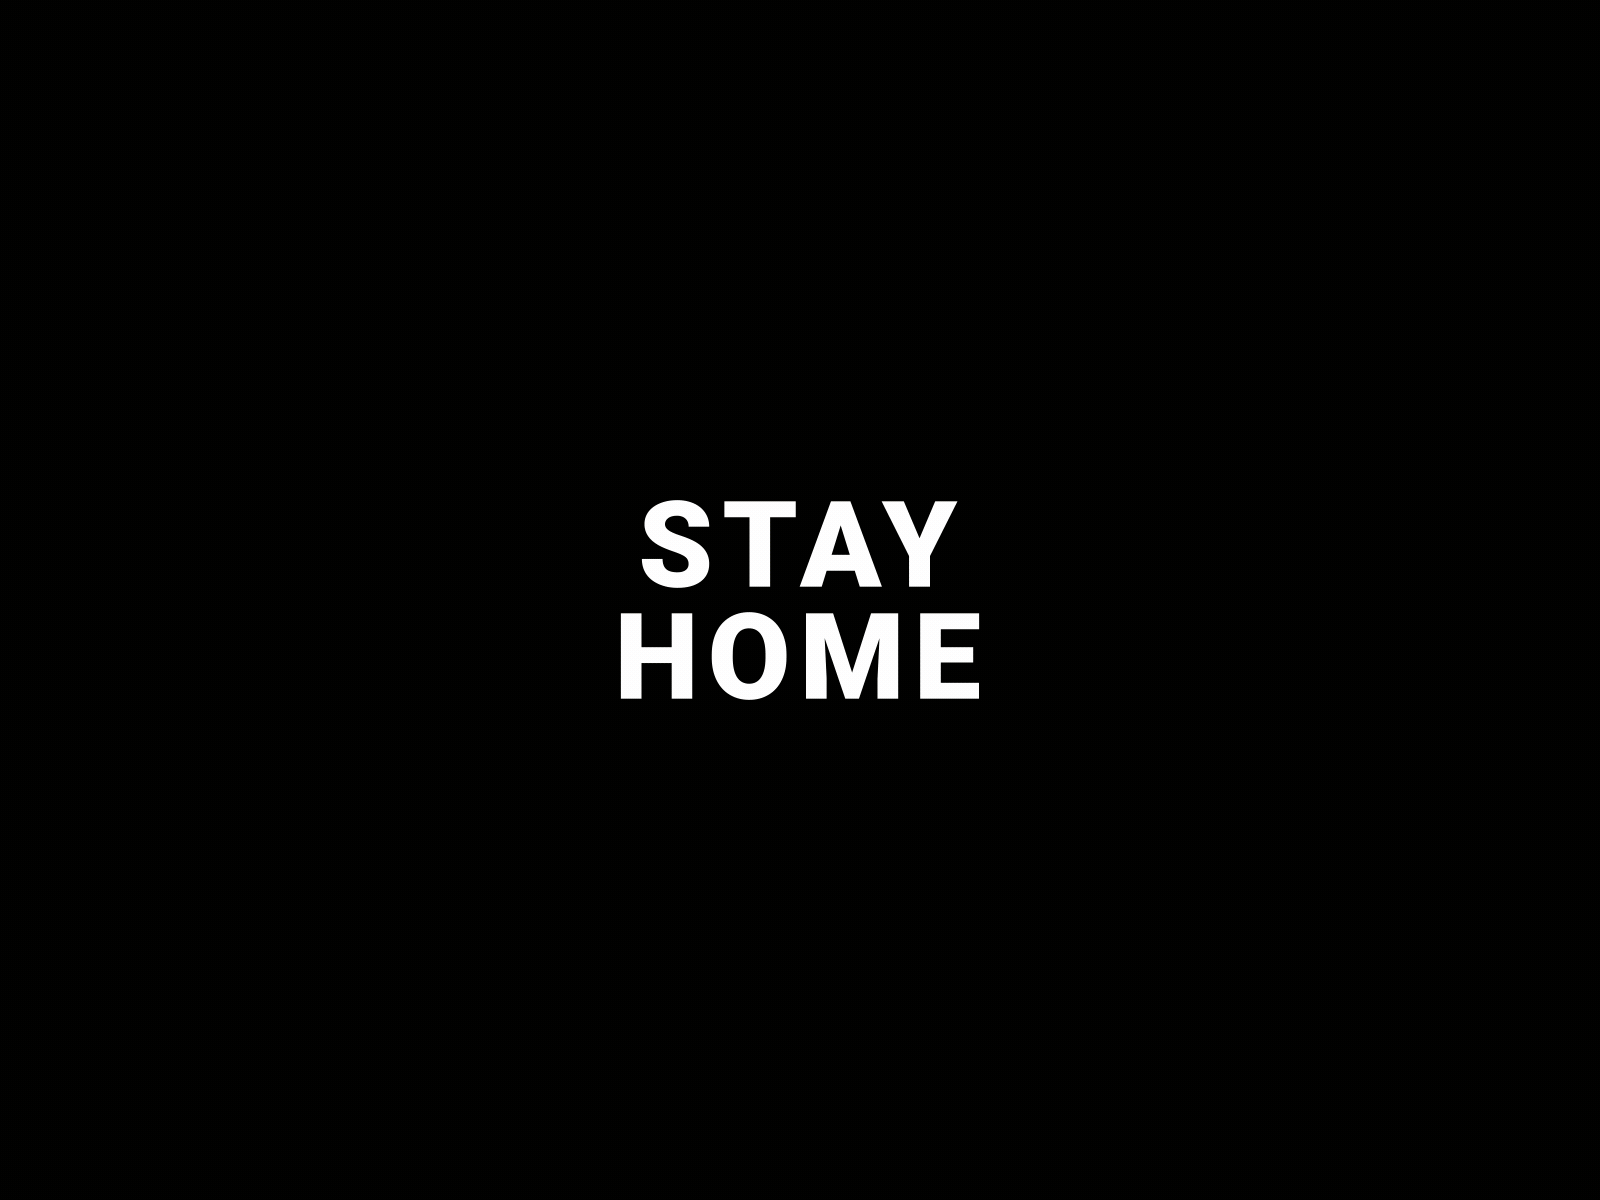 Stay Home, Stay Safe aftereffects glitch motion design